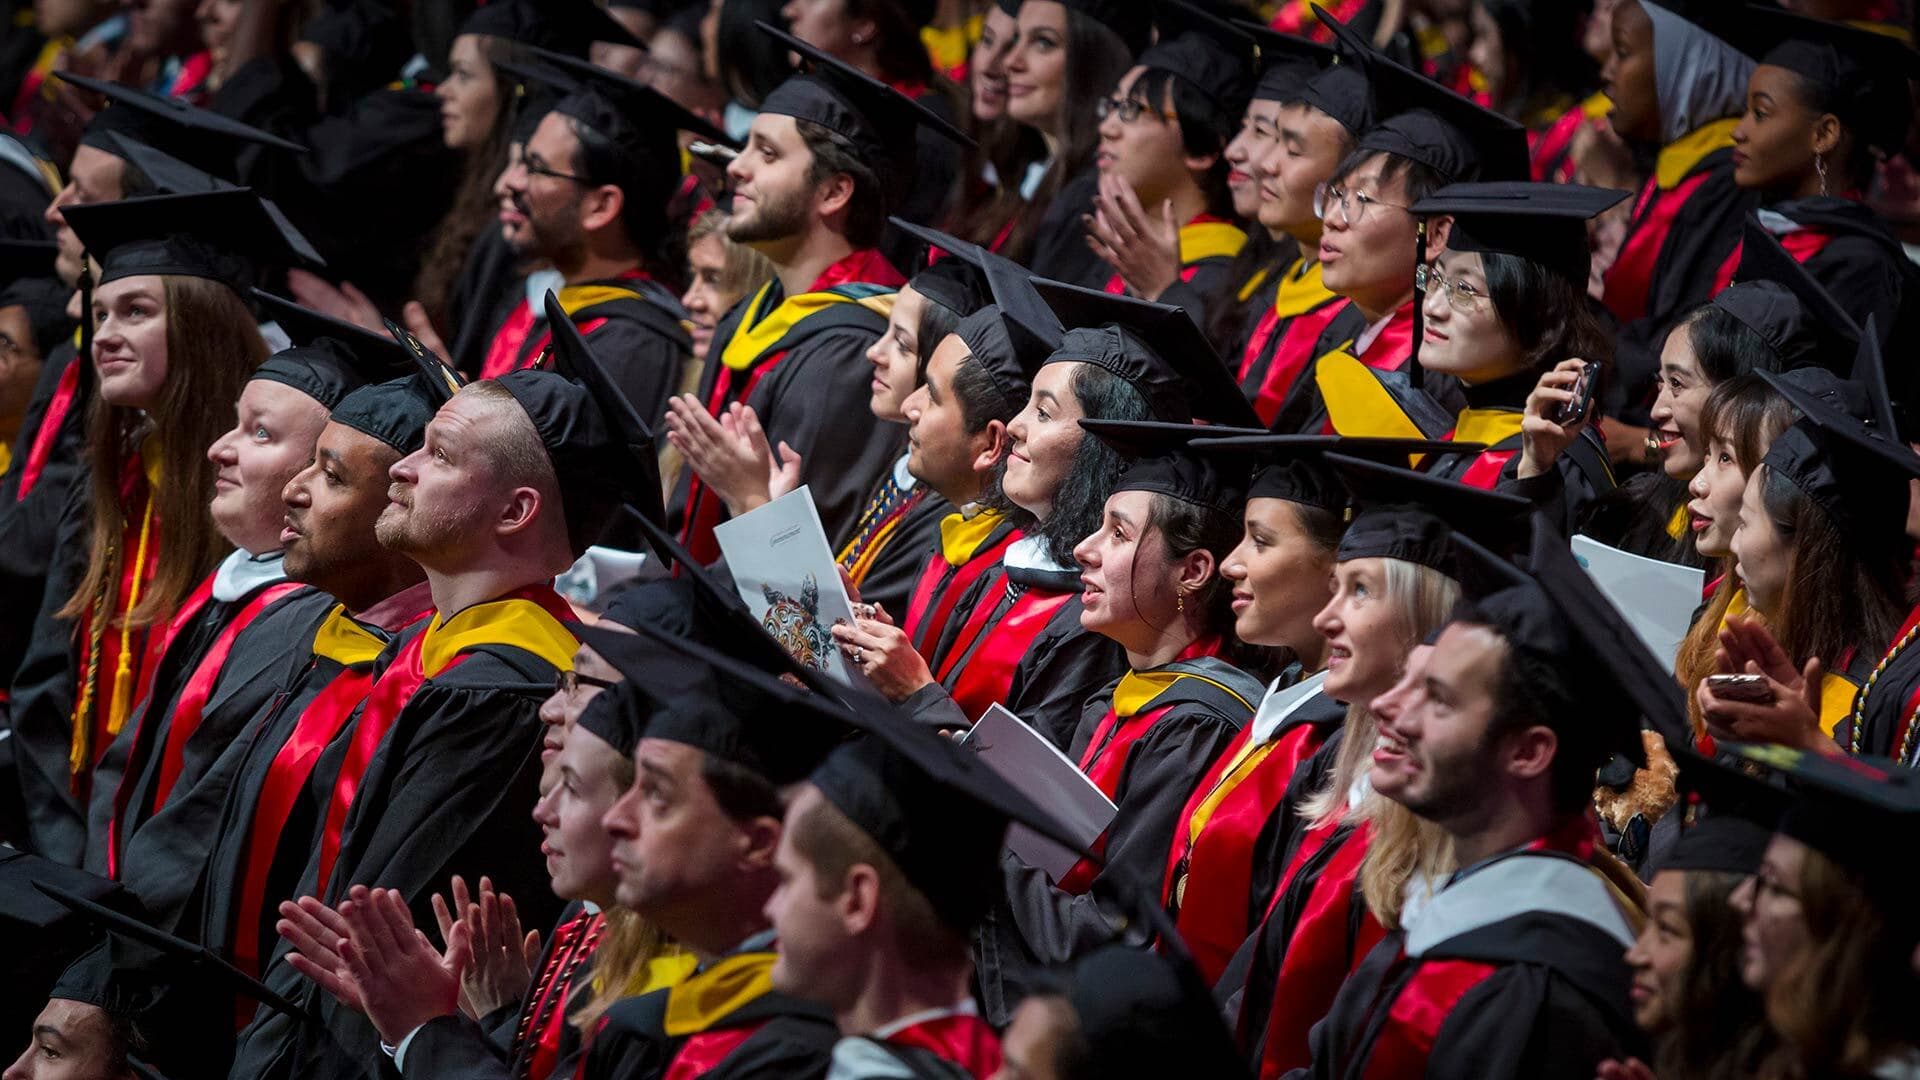 Rows of students in caps and gowns attend the Winter 2019 Commencement ceremony at the Xfinity Center